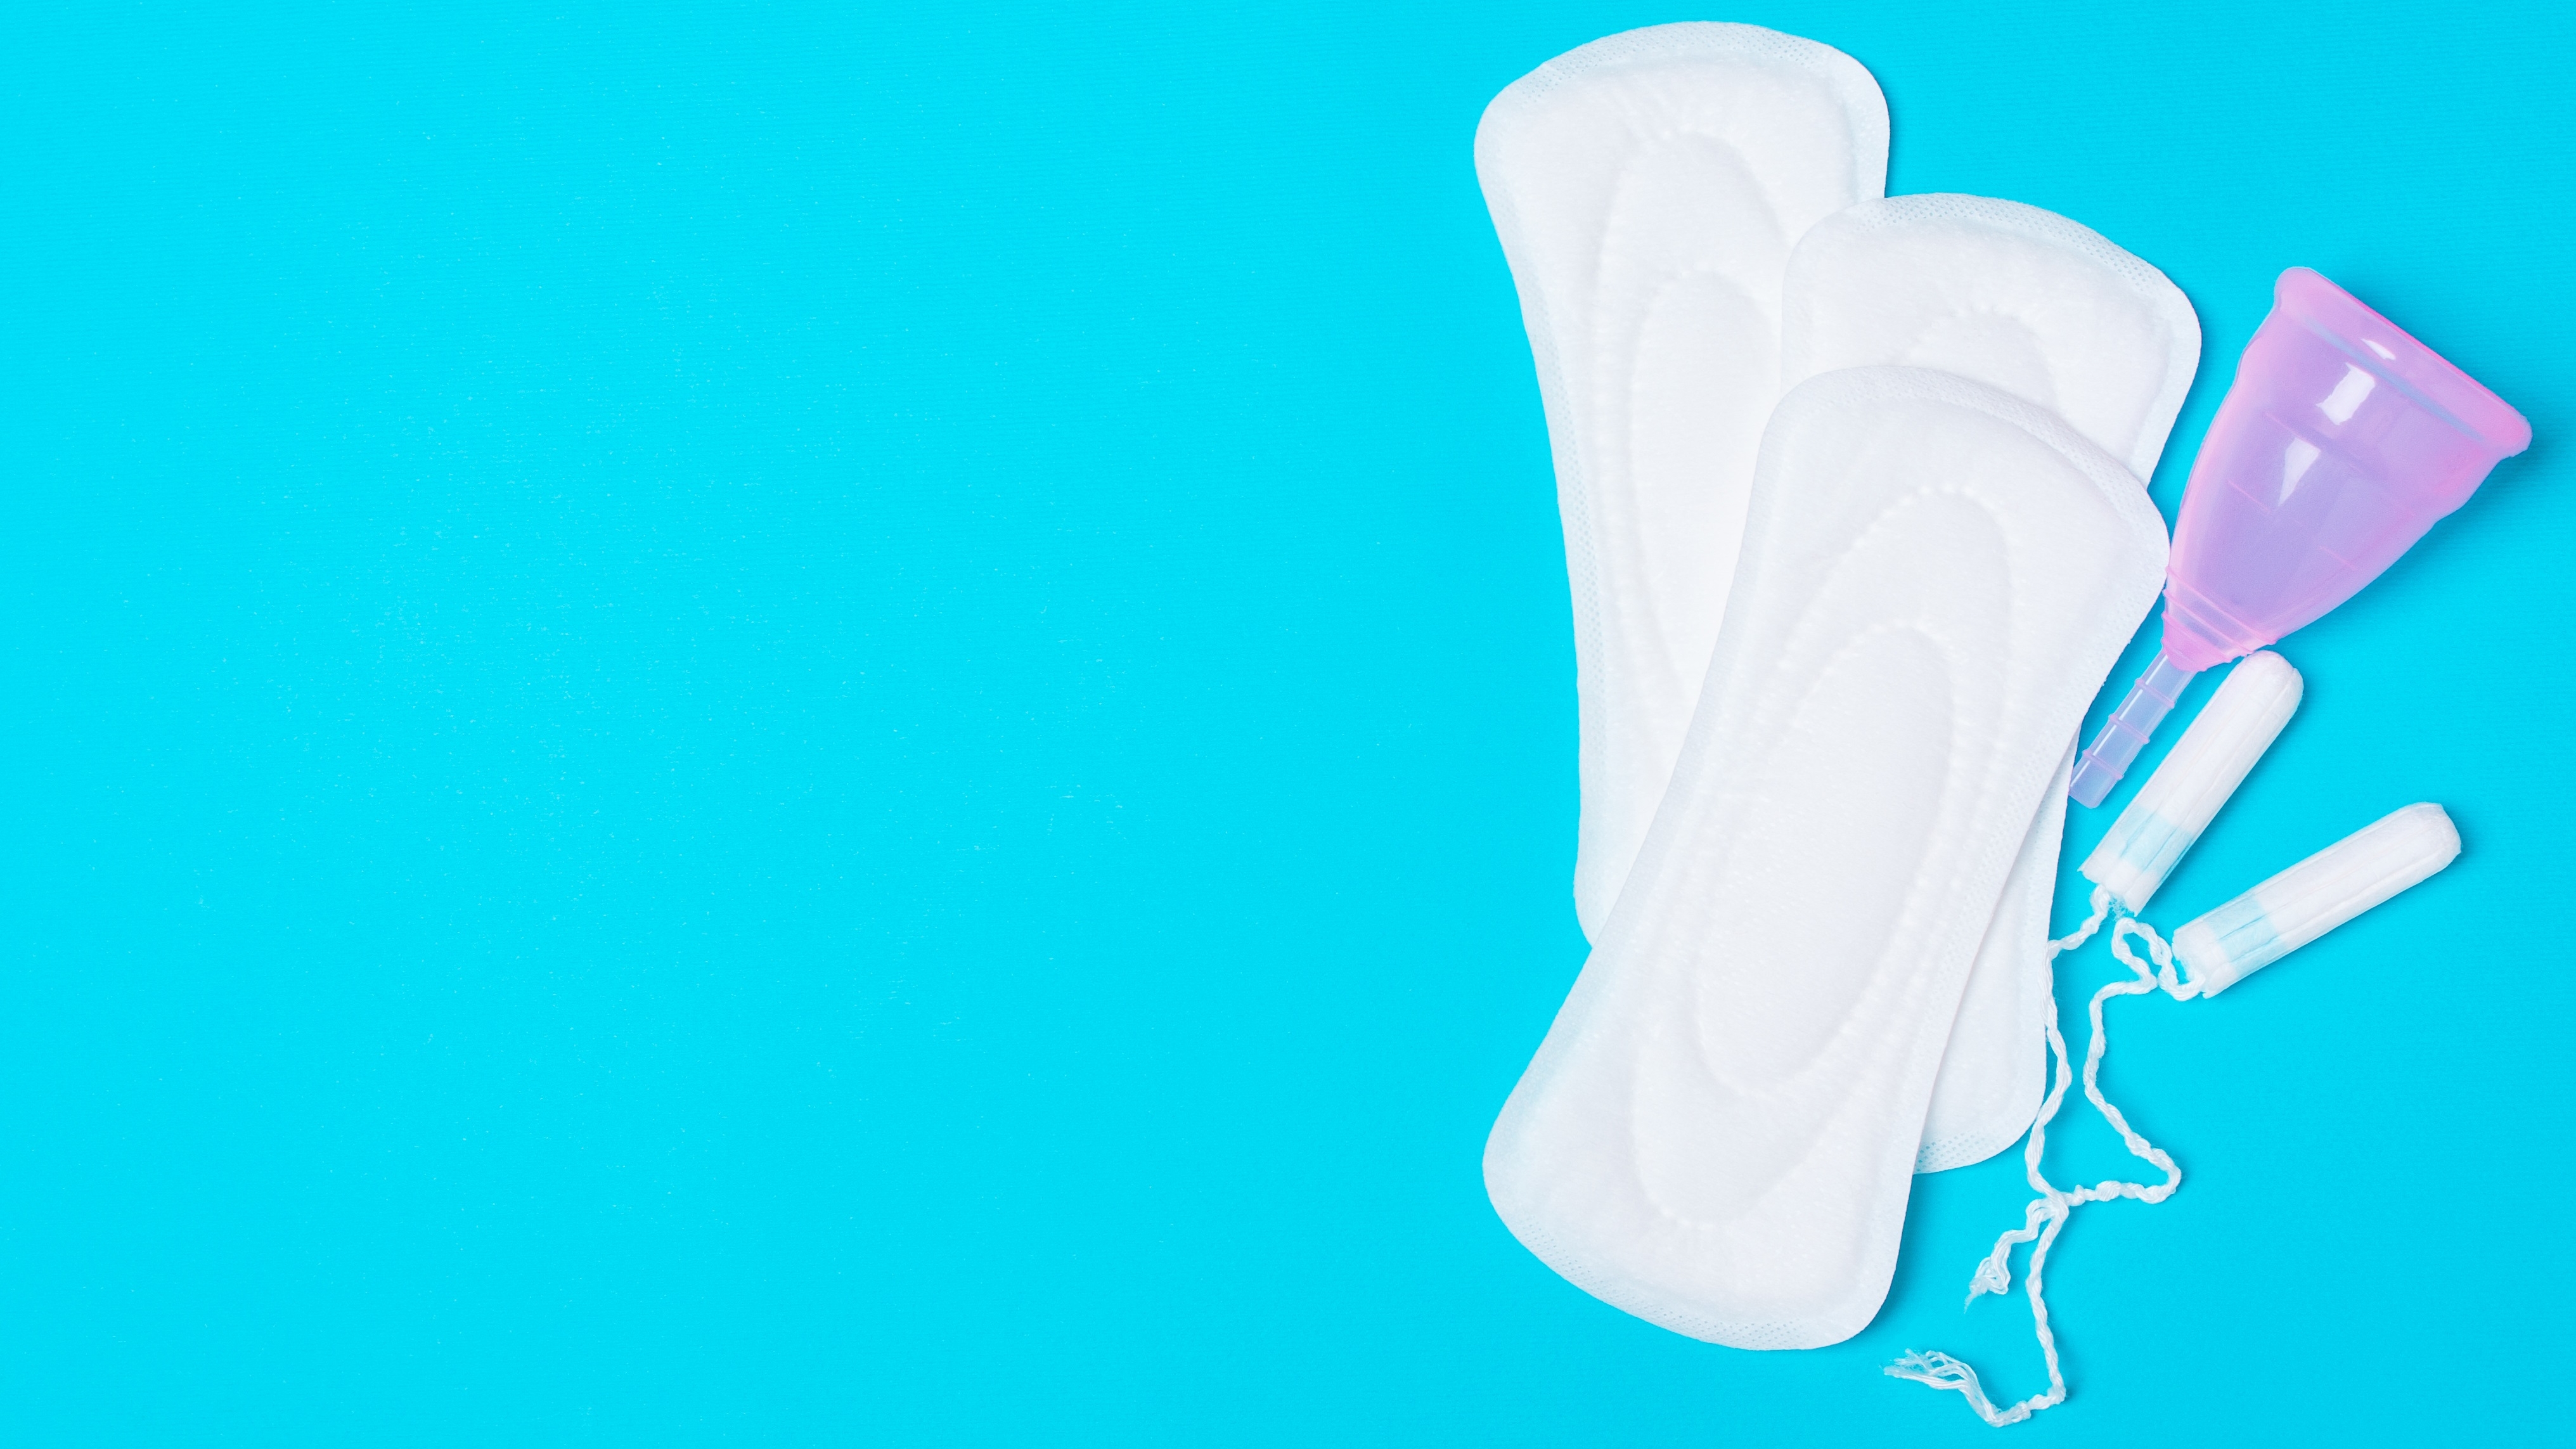 Sanitary pad hacks to prevent leakage during periods